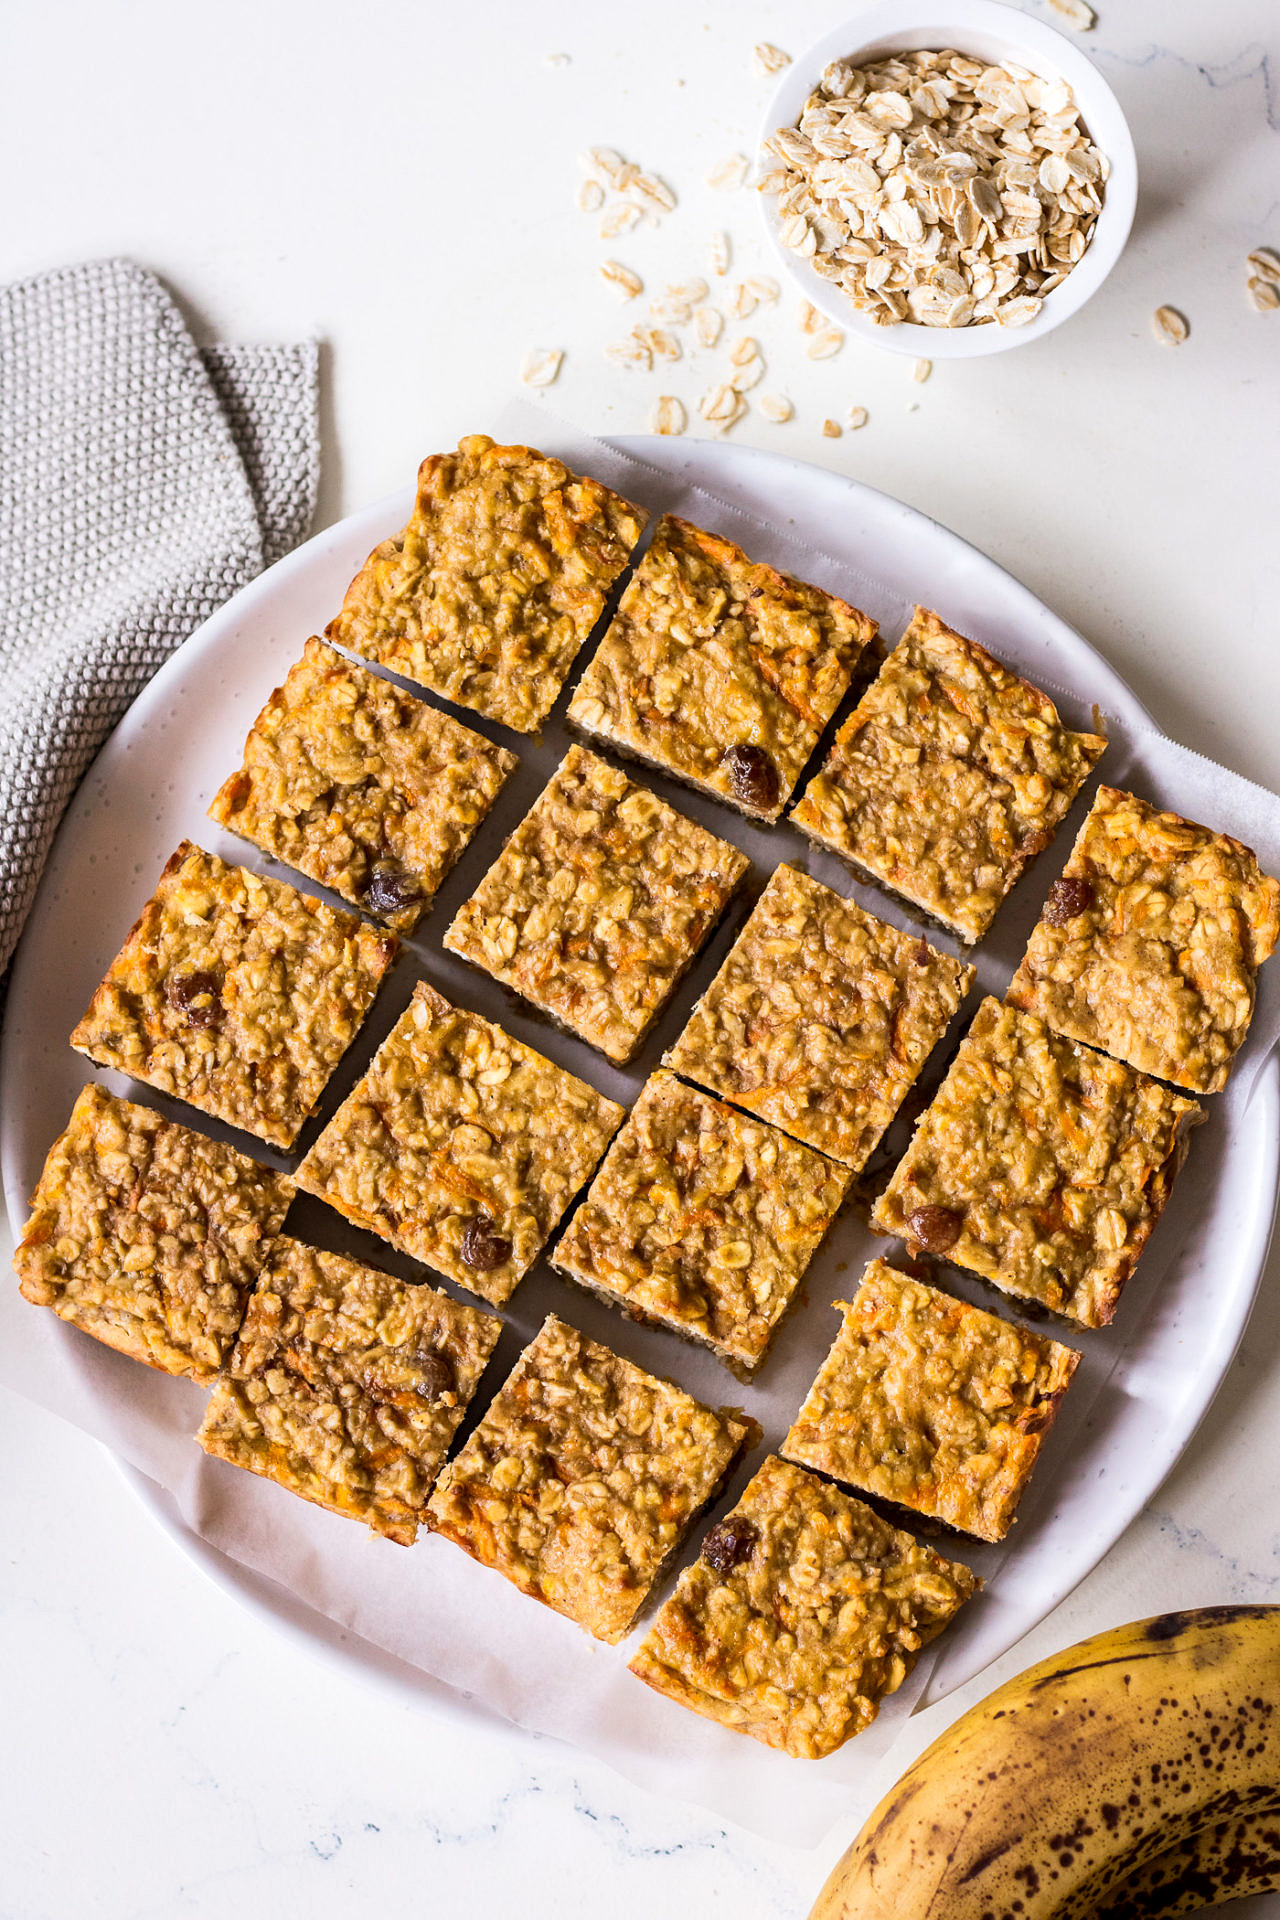 Oatmeal bars arranged on a white ceramic plate with rolled oats and banana